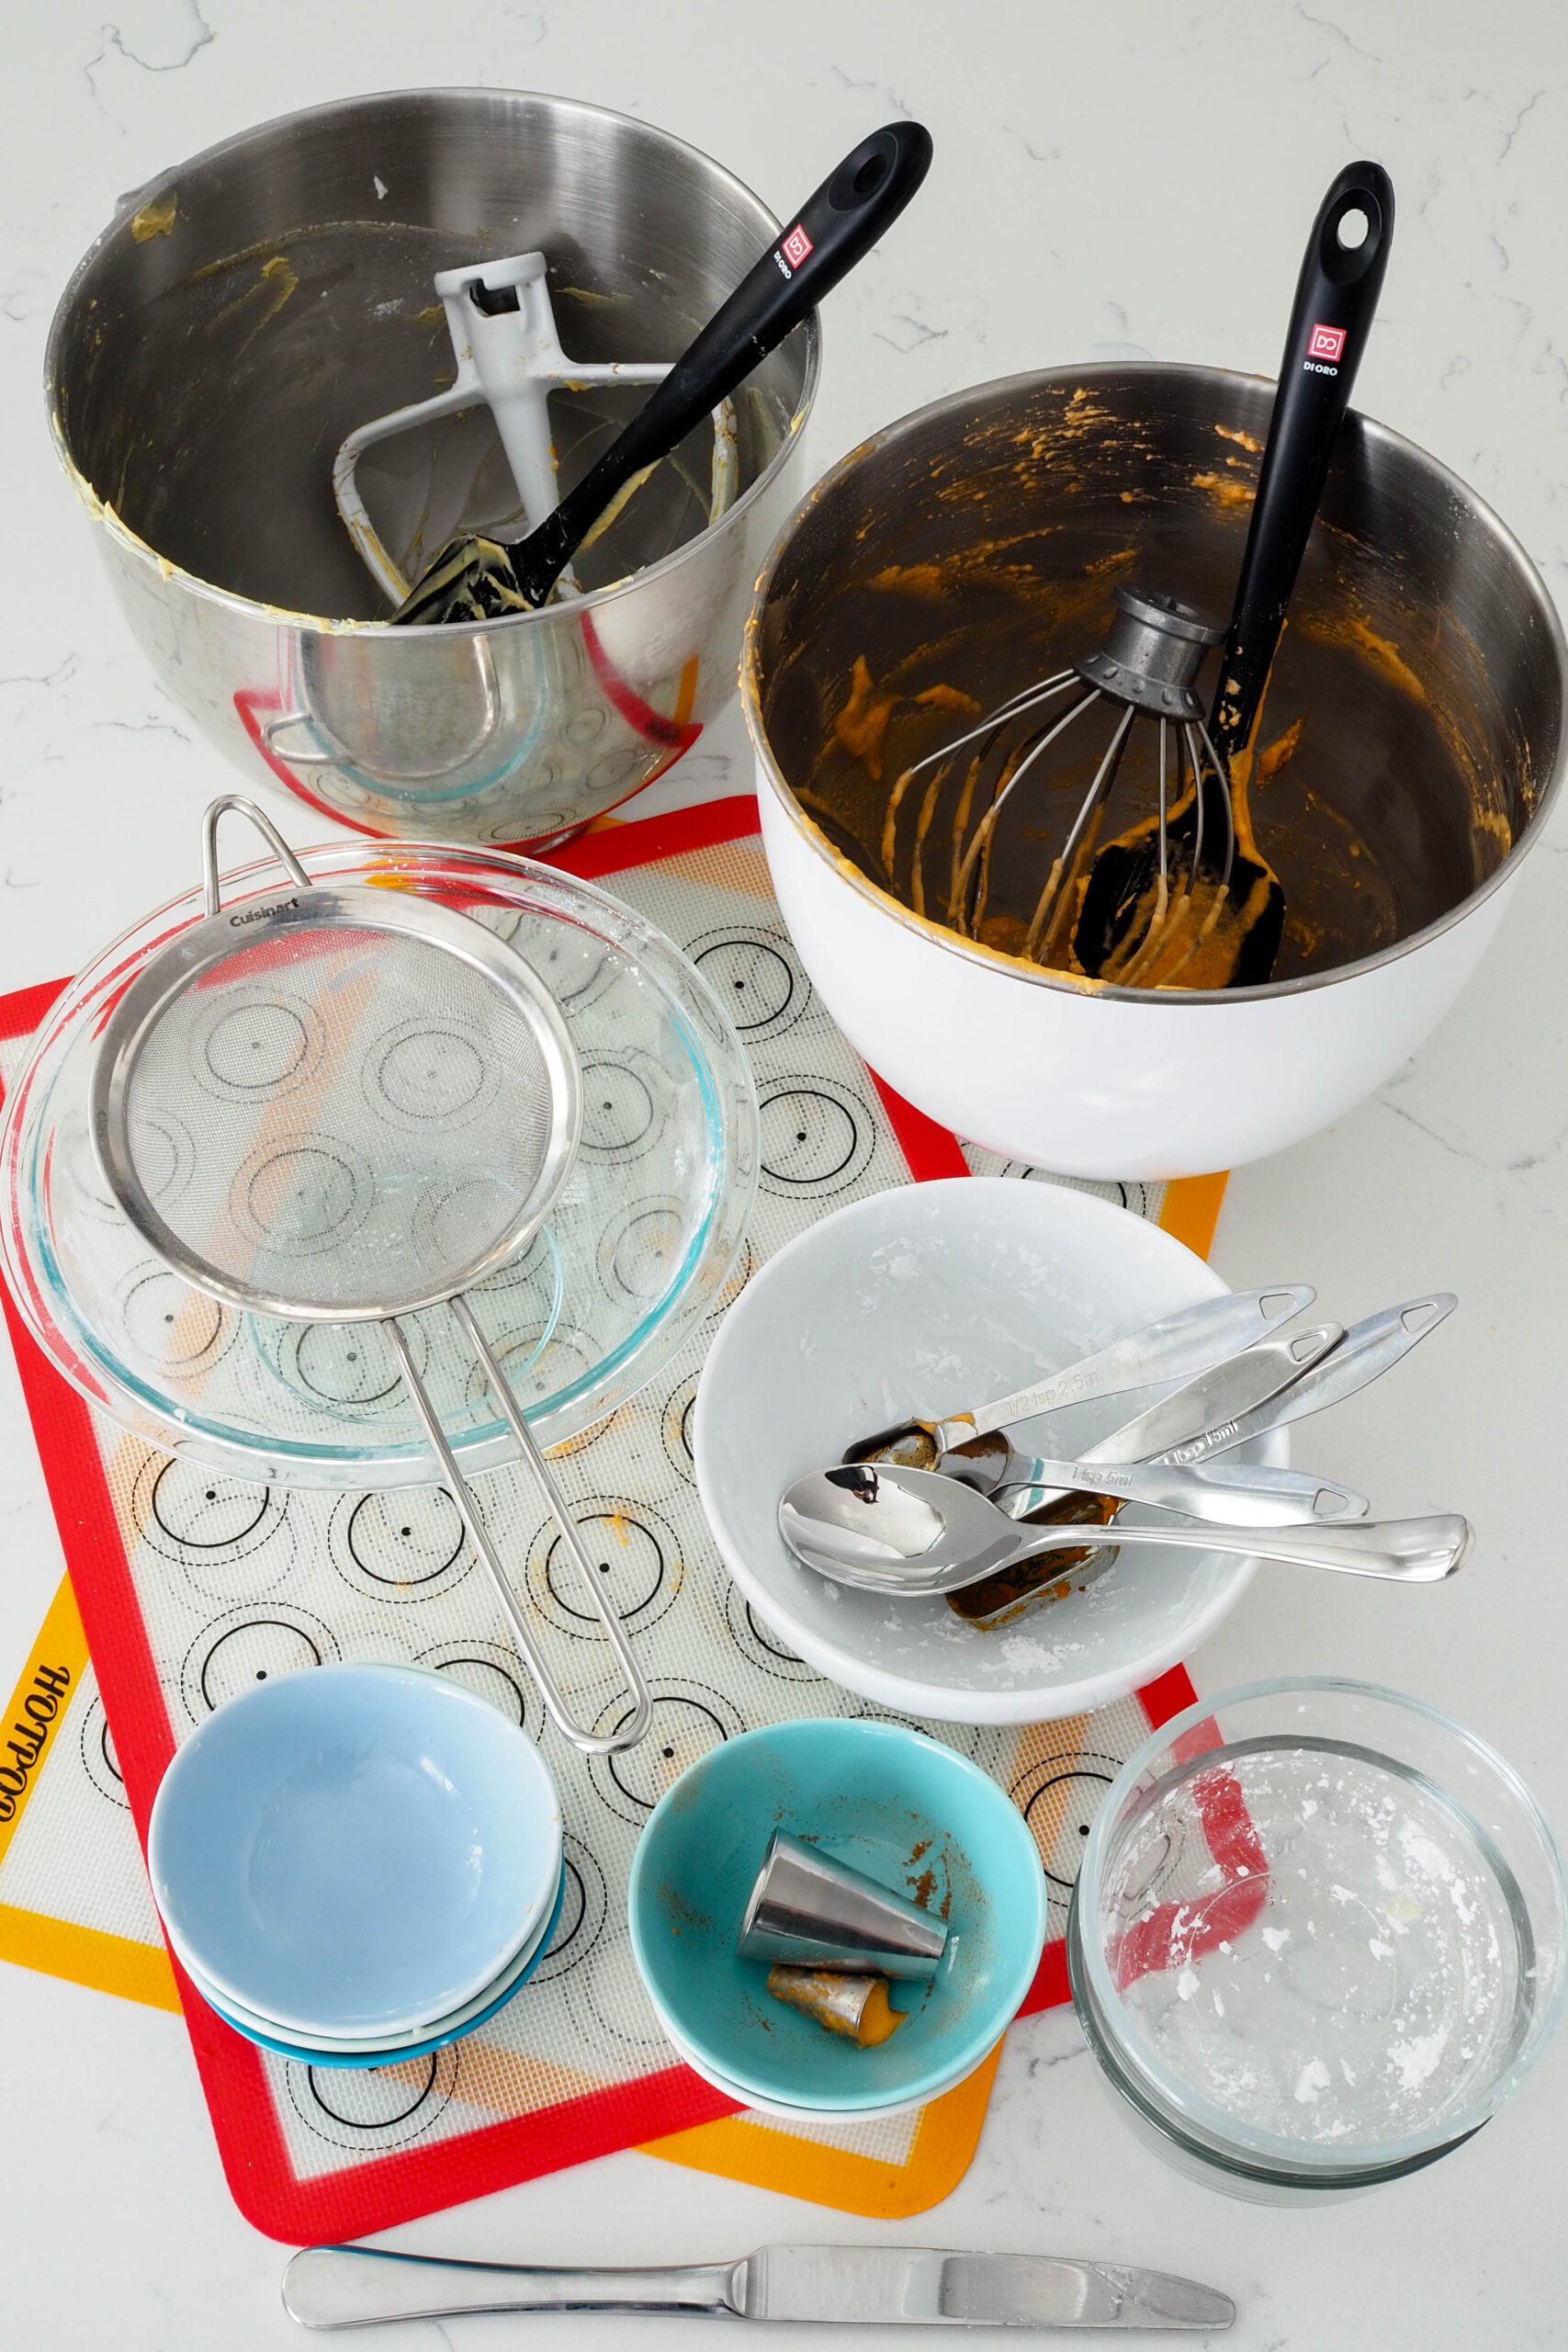 A collection of dishes and utensils used to make pumpkin spice macarons.